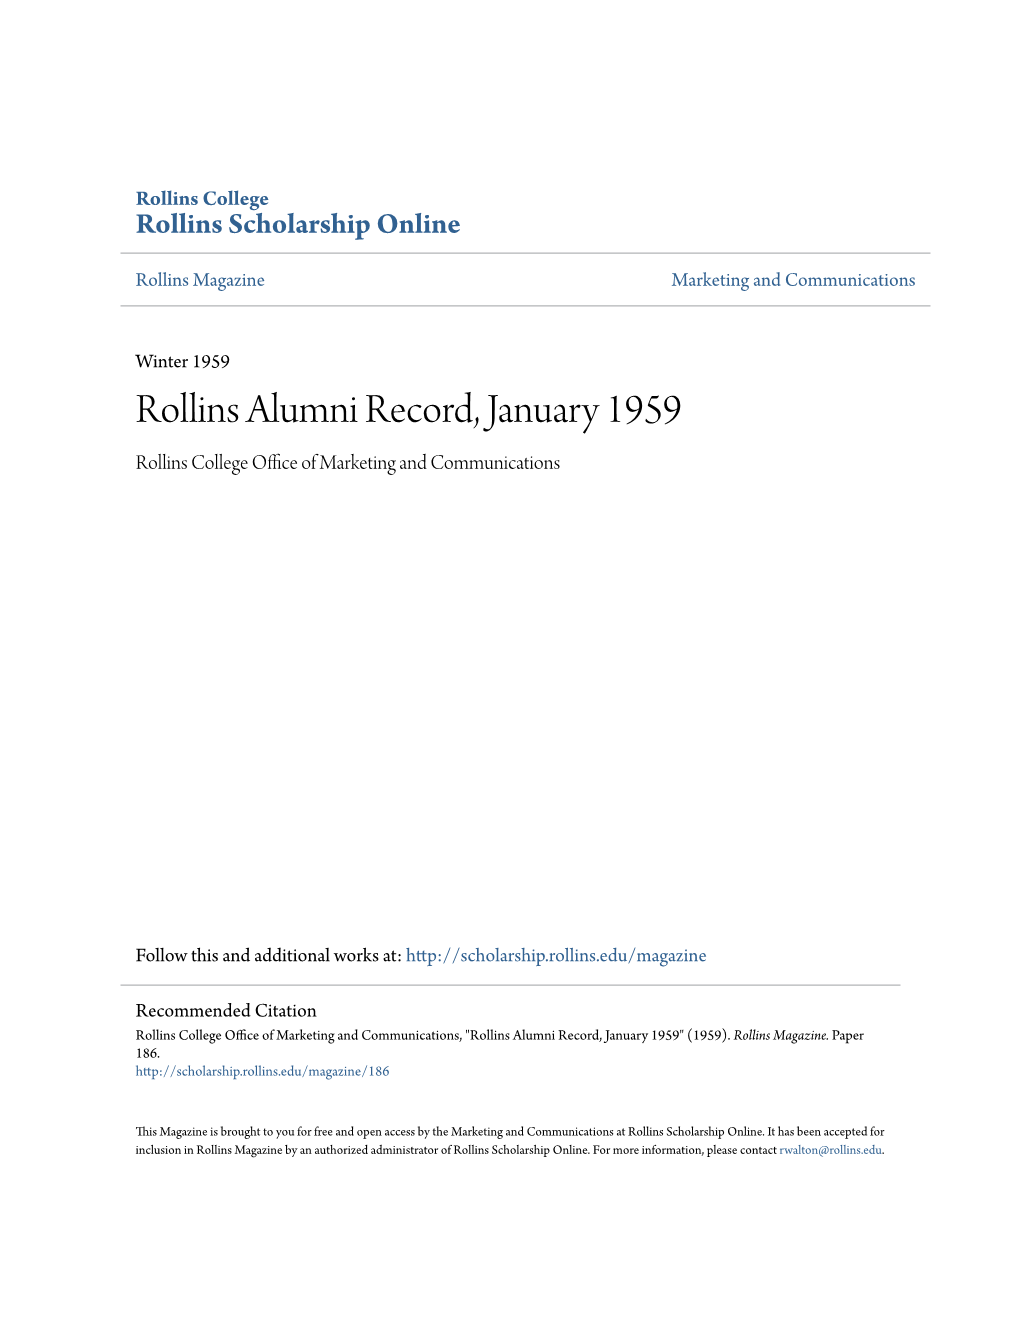 Rollins Alumni Record, January 1959 Rollins College Office Ofa M Rketing and Communications